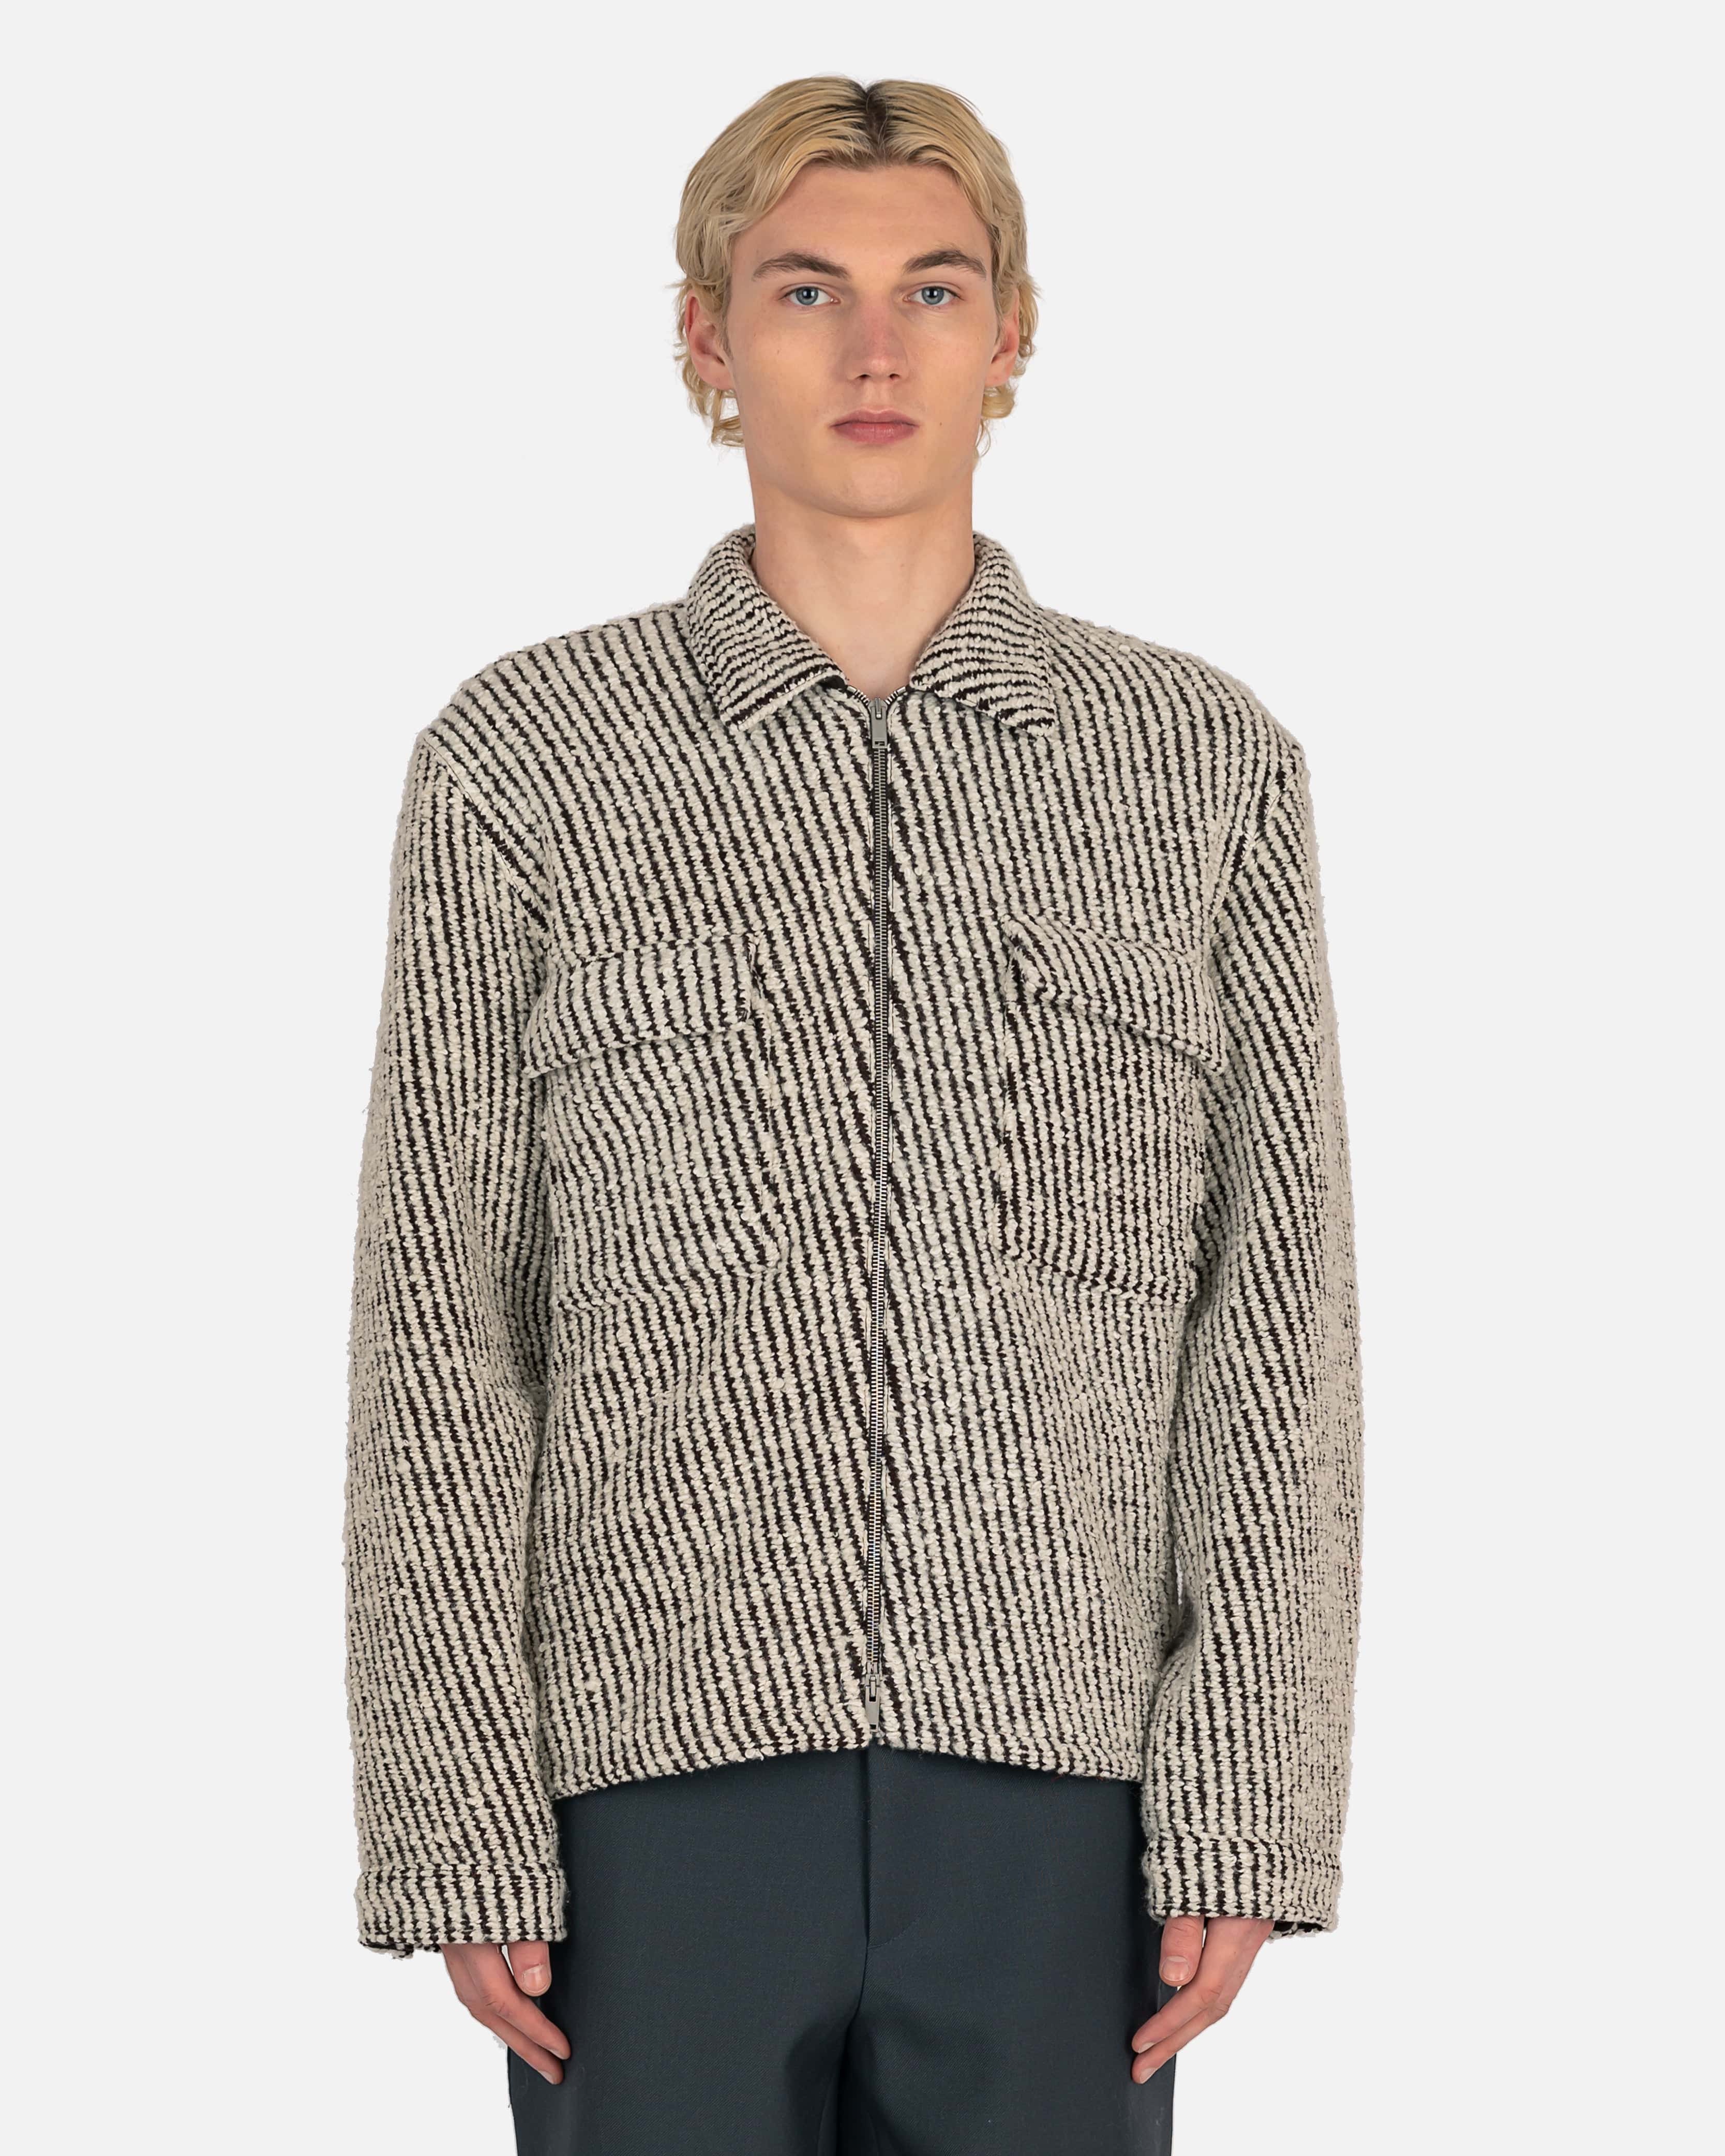 Jacquard in Open White SVRN Knit Shirt –